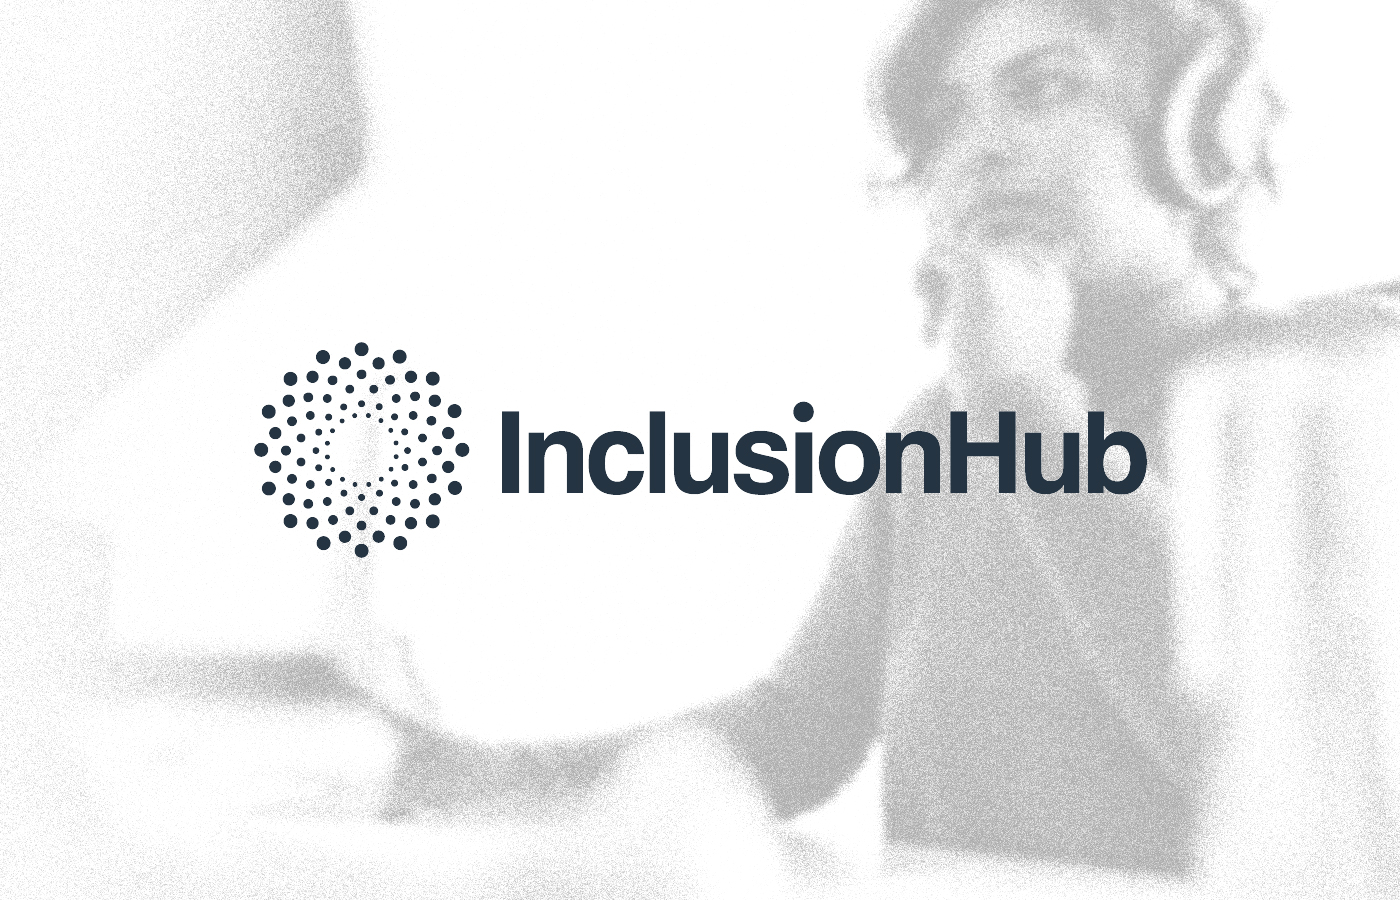 InclusionHub Logo on Grainy background of woman using computer